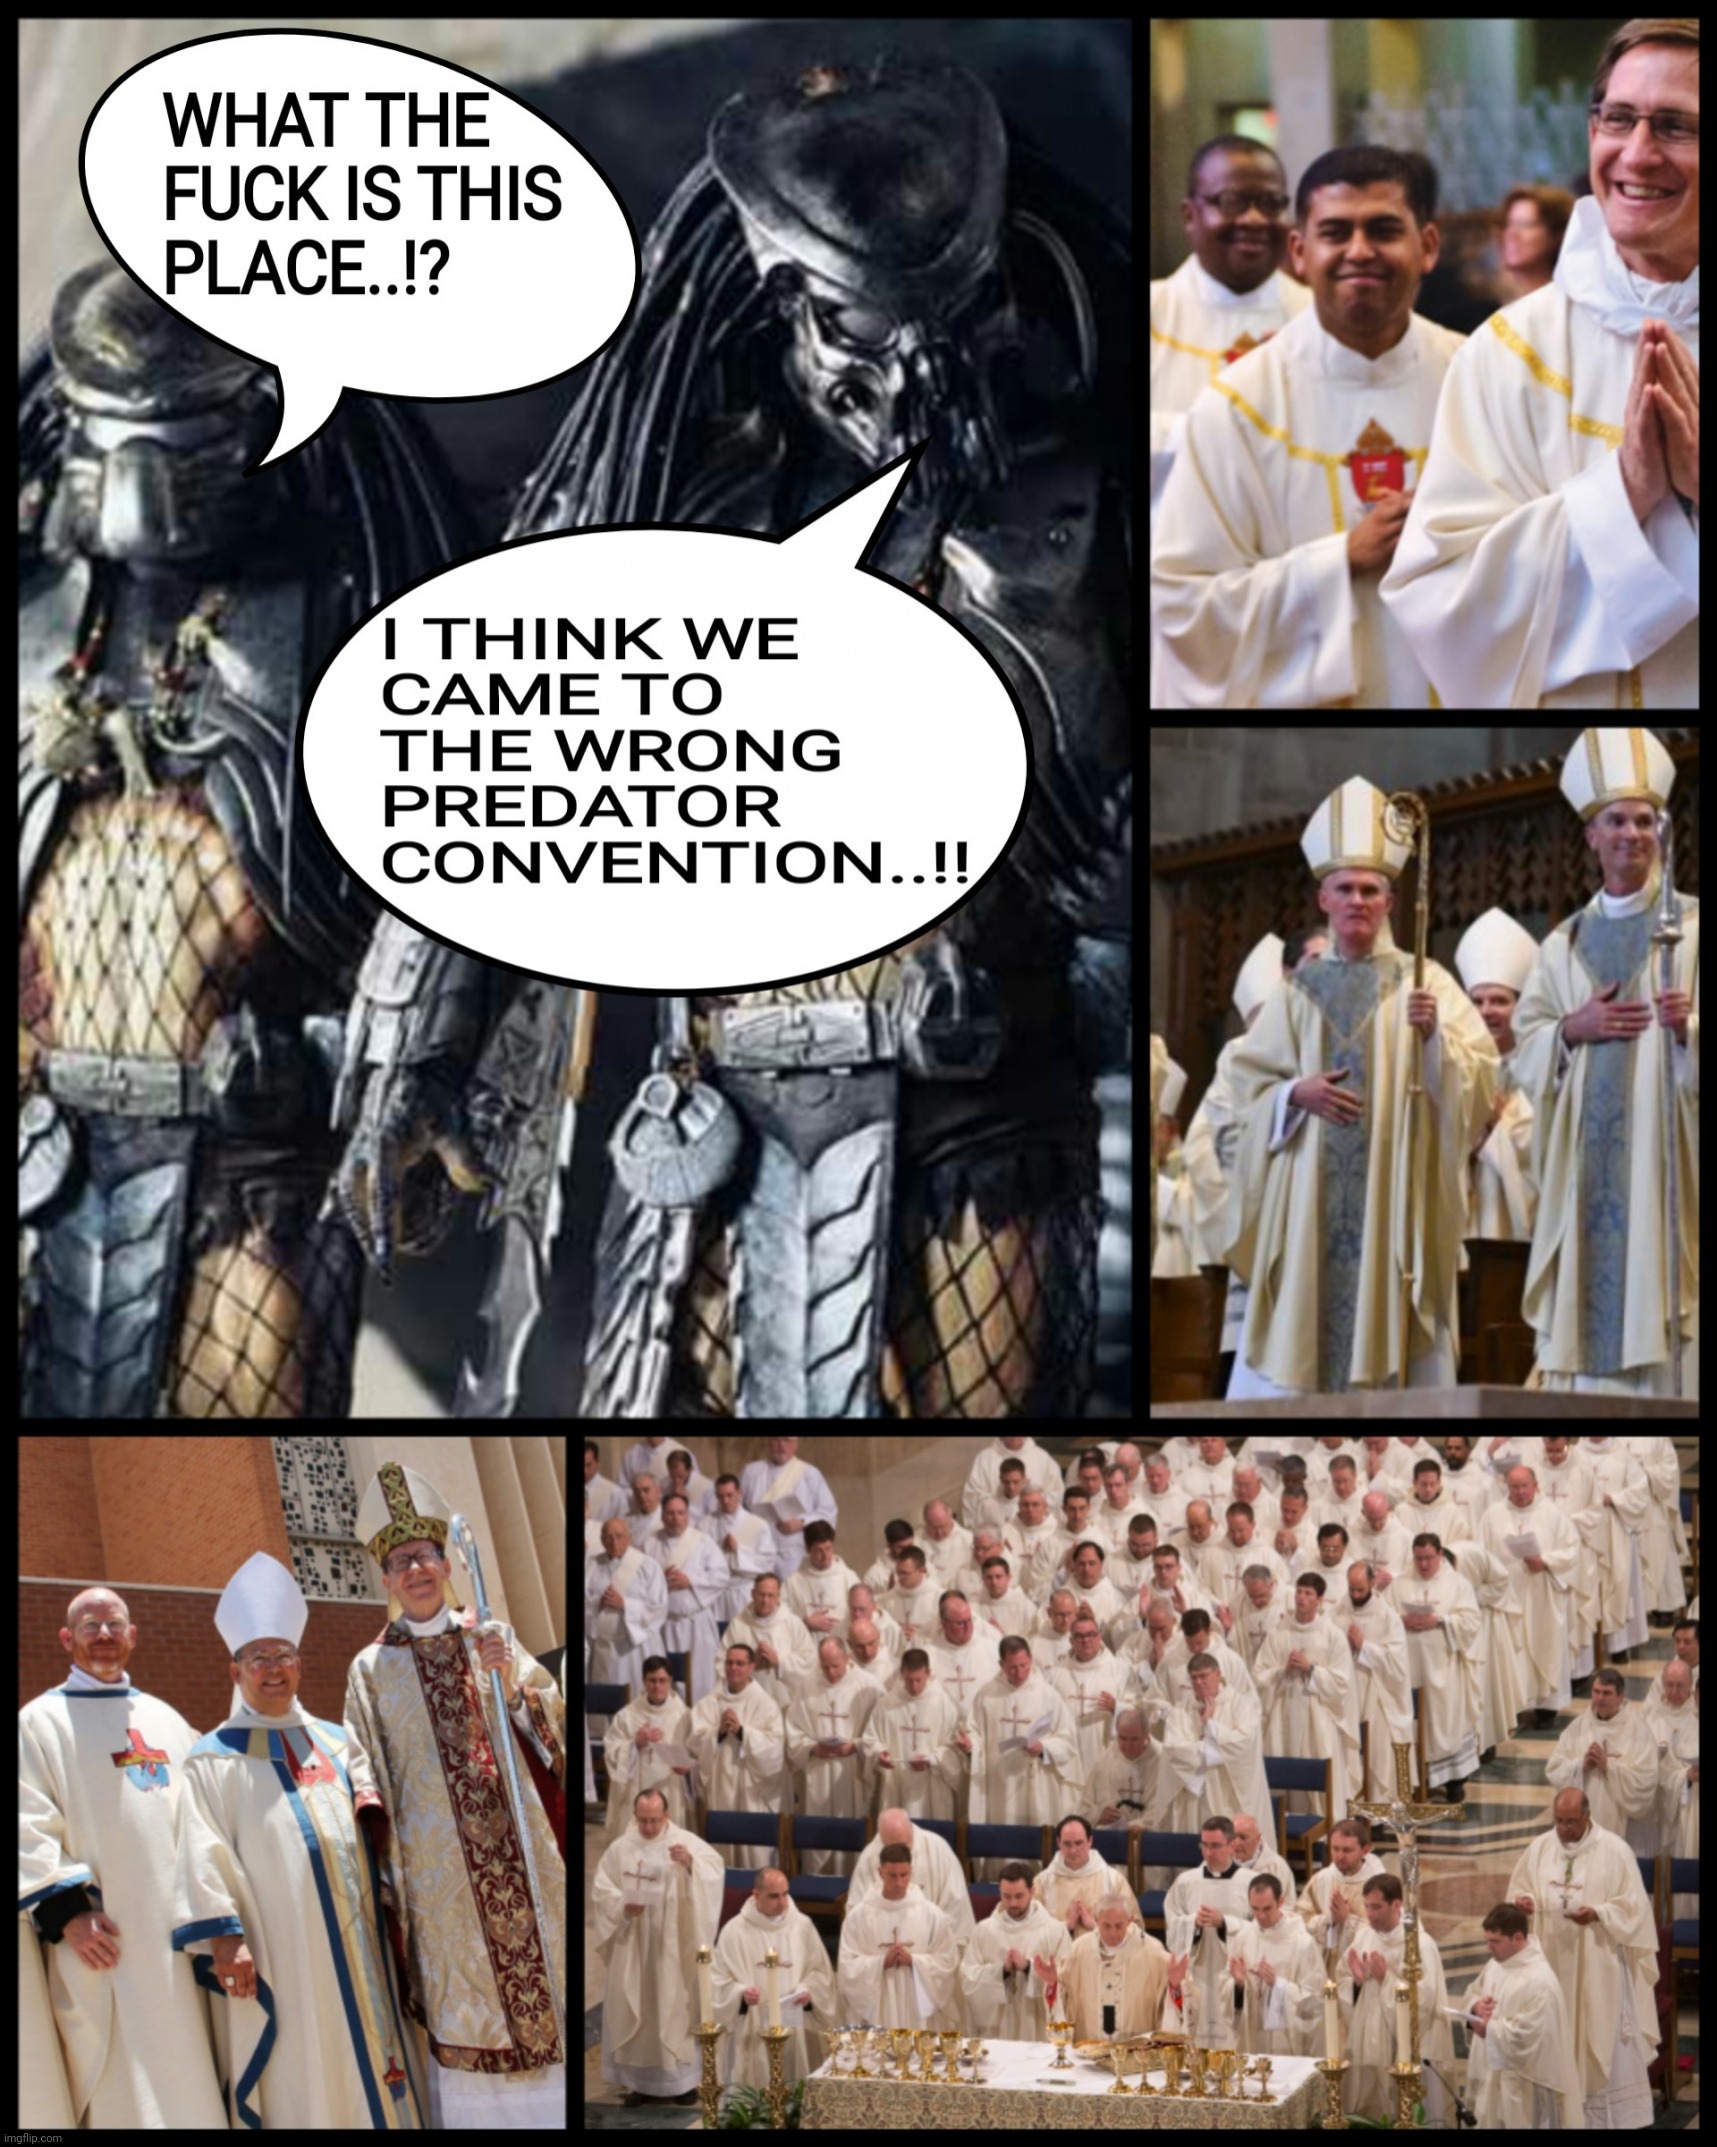 I THINK WE CAME TO THE WRONG PREDATOR CONVENTION..!! | image tagged in predator,sexual predator,priest,convention,pedophile,memes | made w/ Imgflip meme maker